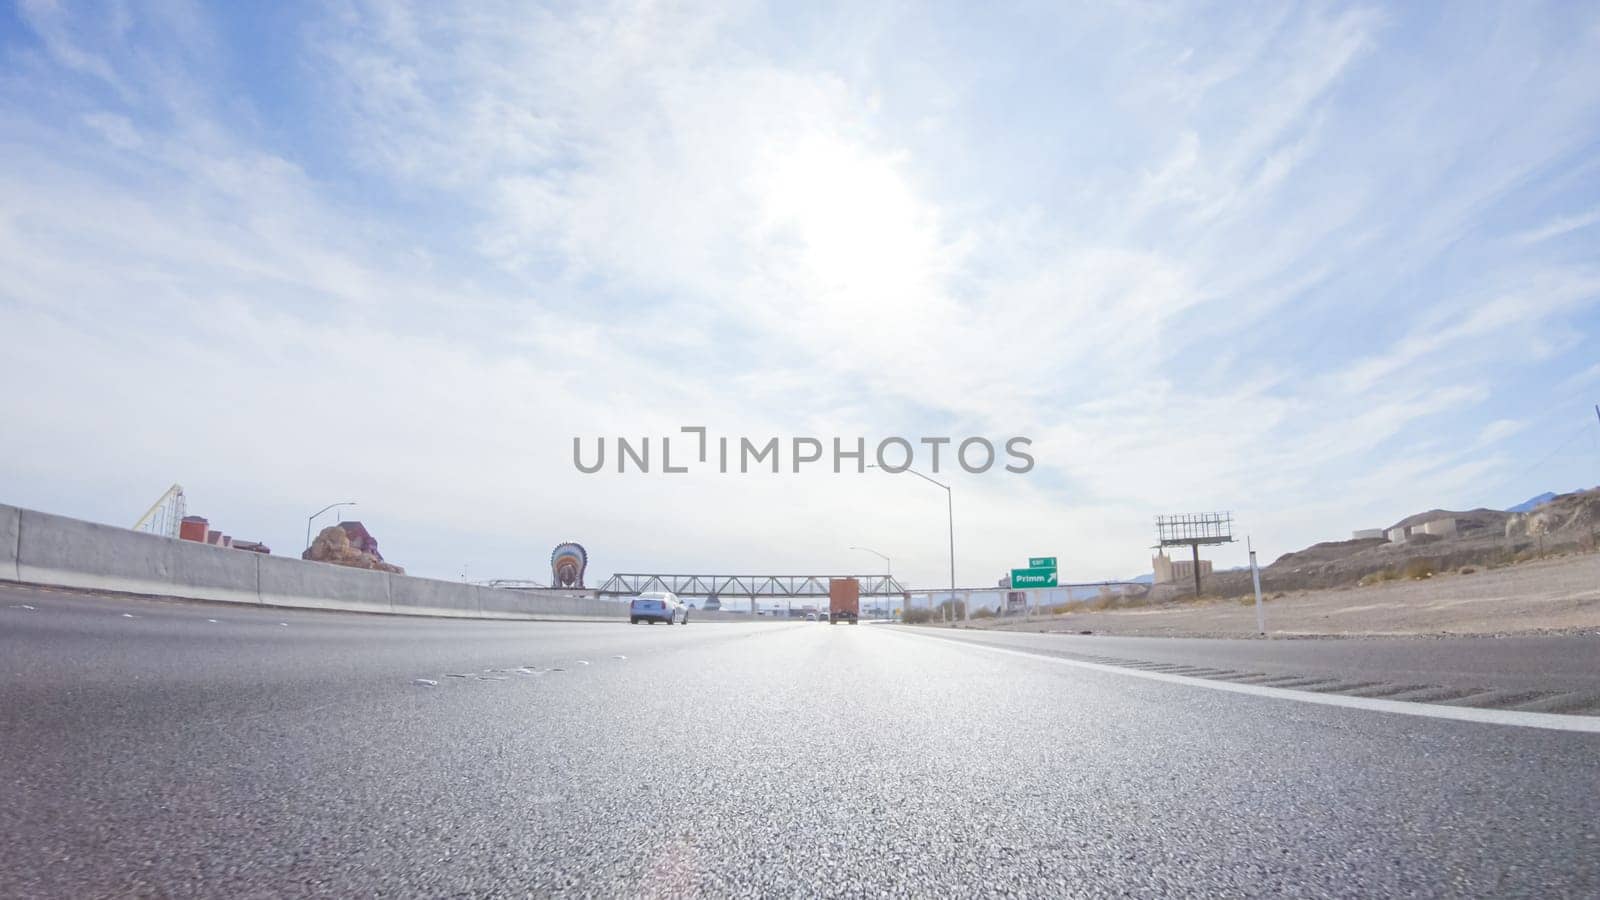 During the day, driving on the streets of Primm near the lively casinos offers a glimpse into the exciting atmosphere of this bustling entertainment destination.